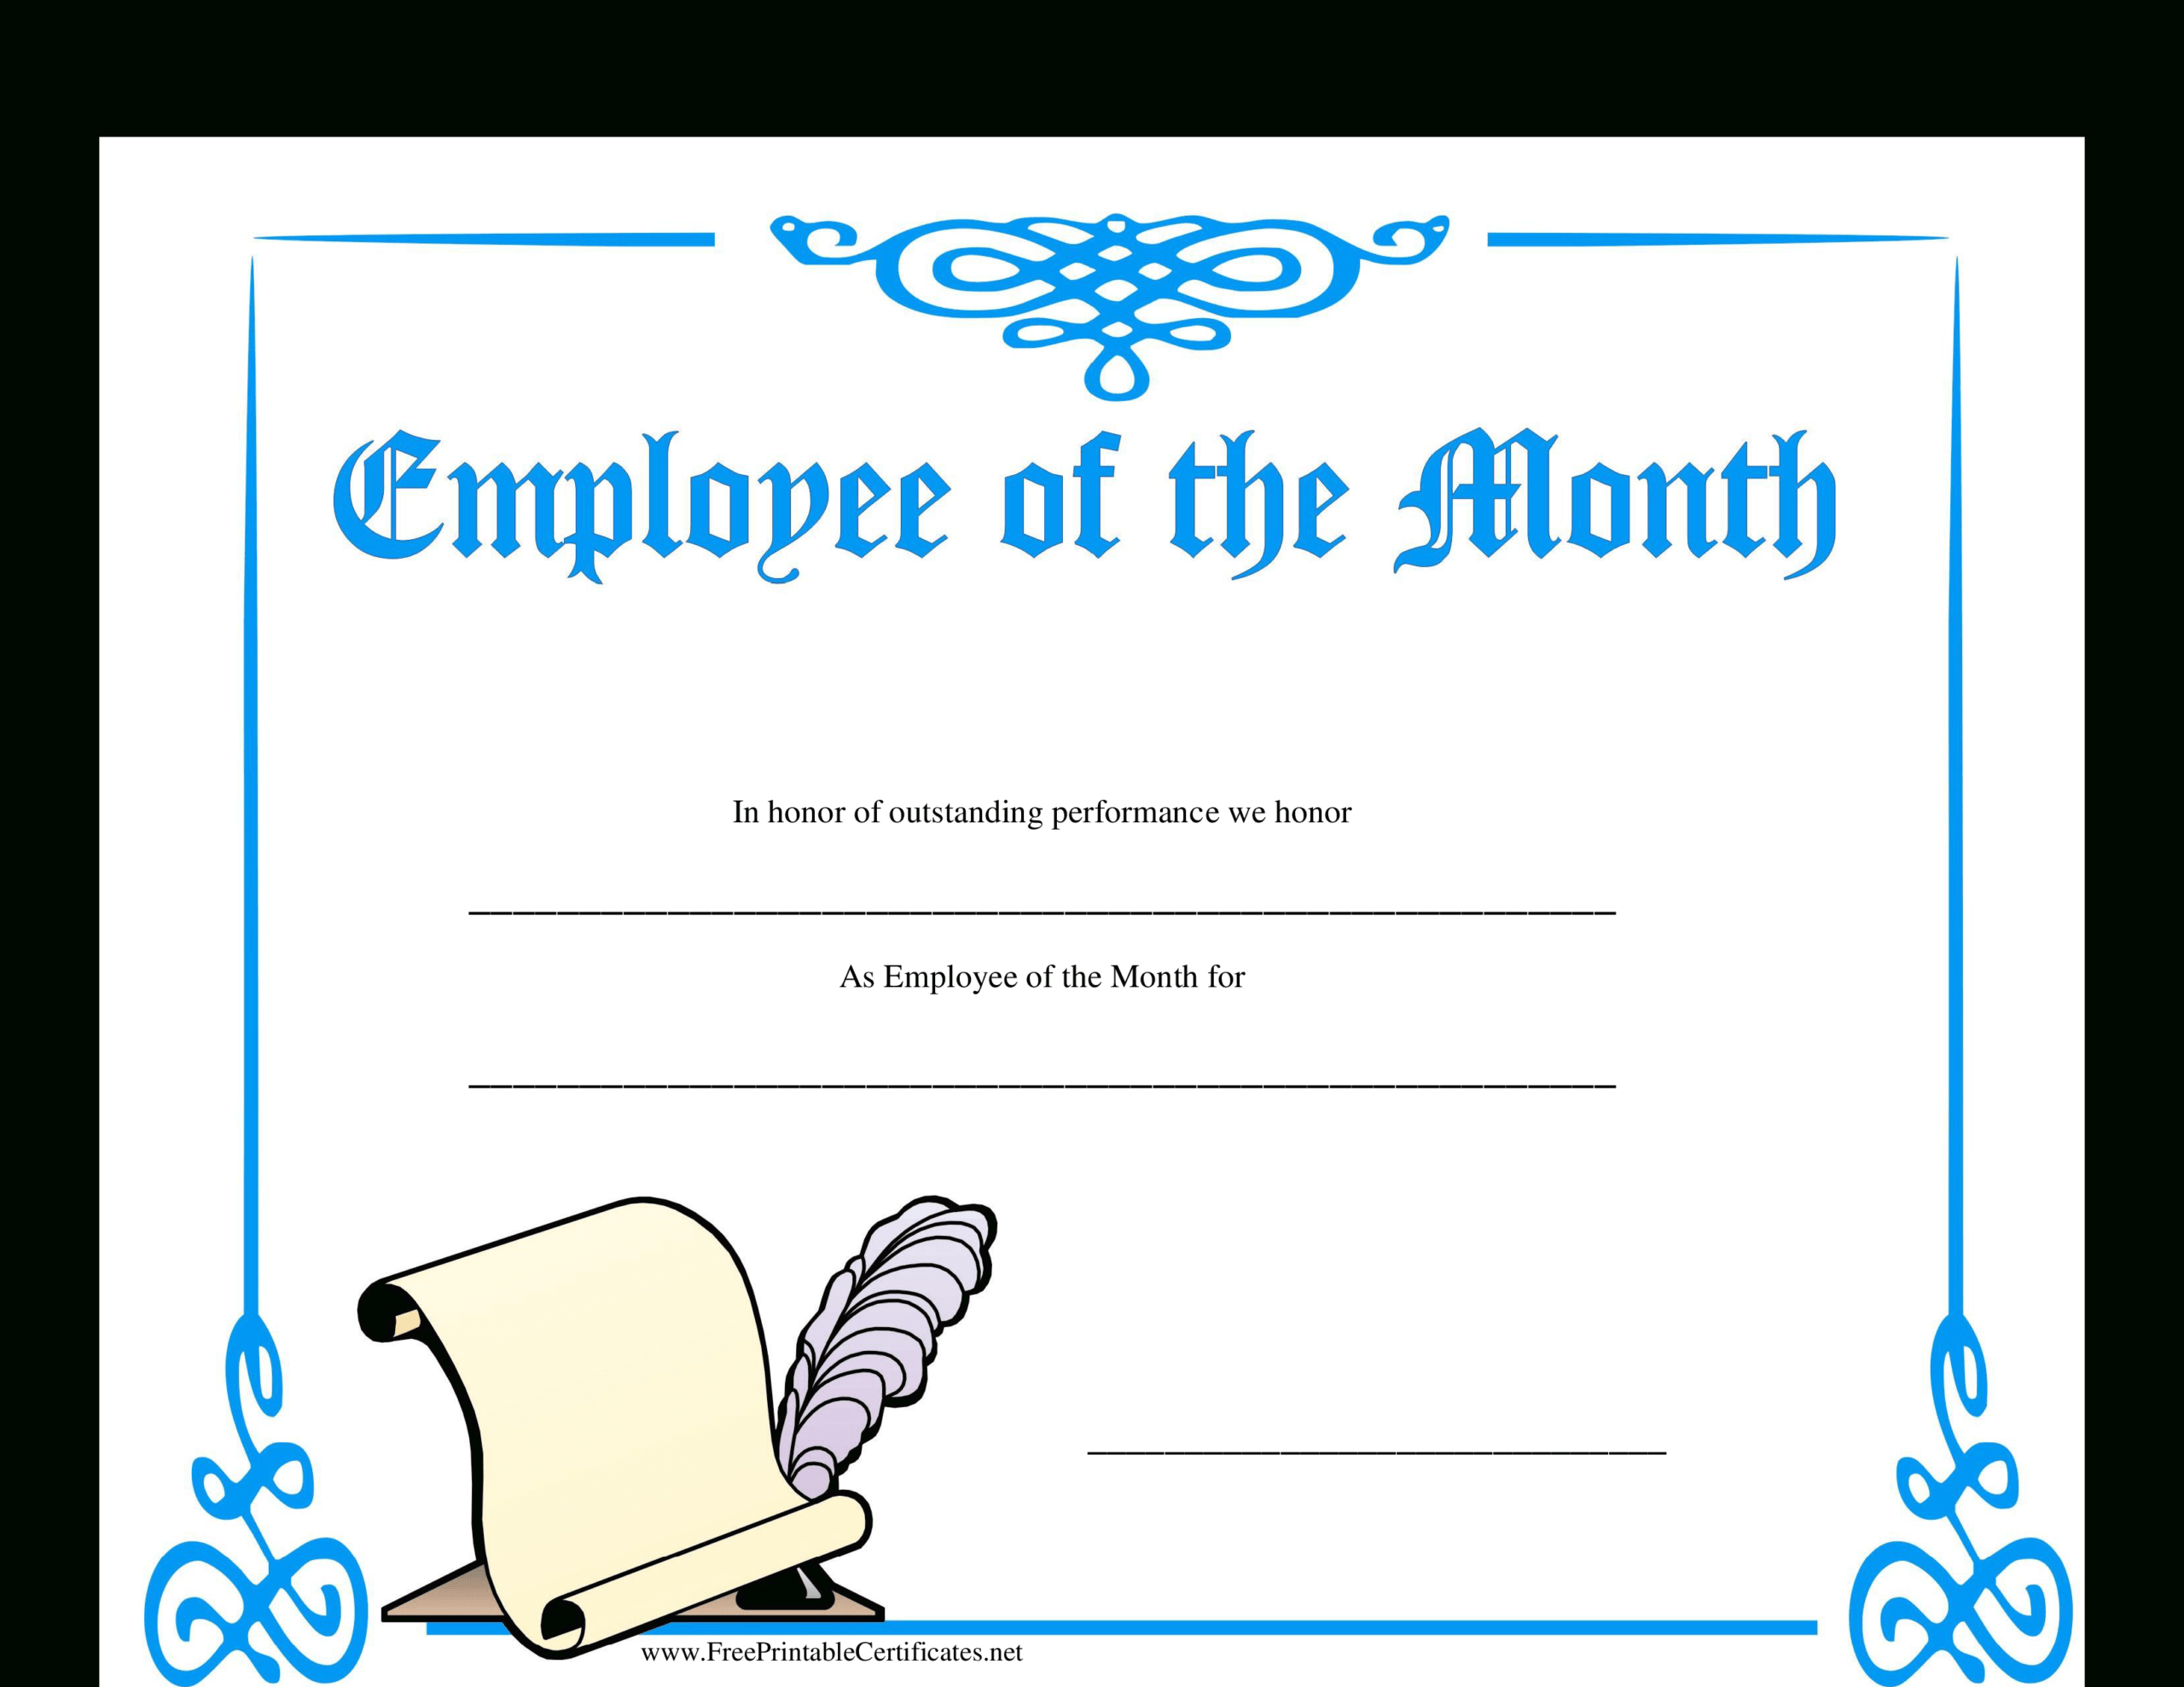 Employee Of The Month Certificate | Templates At With Regard To Employee Of The Month Certificate Template With Picture